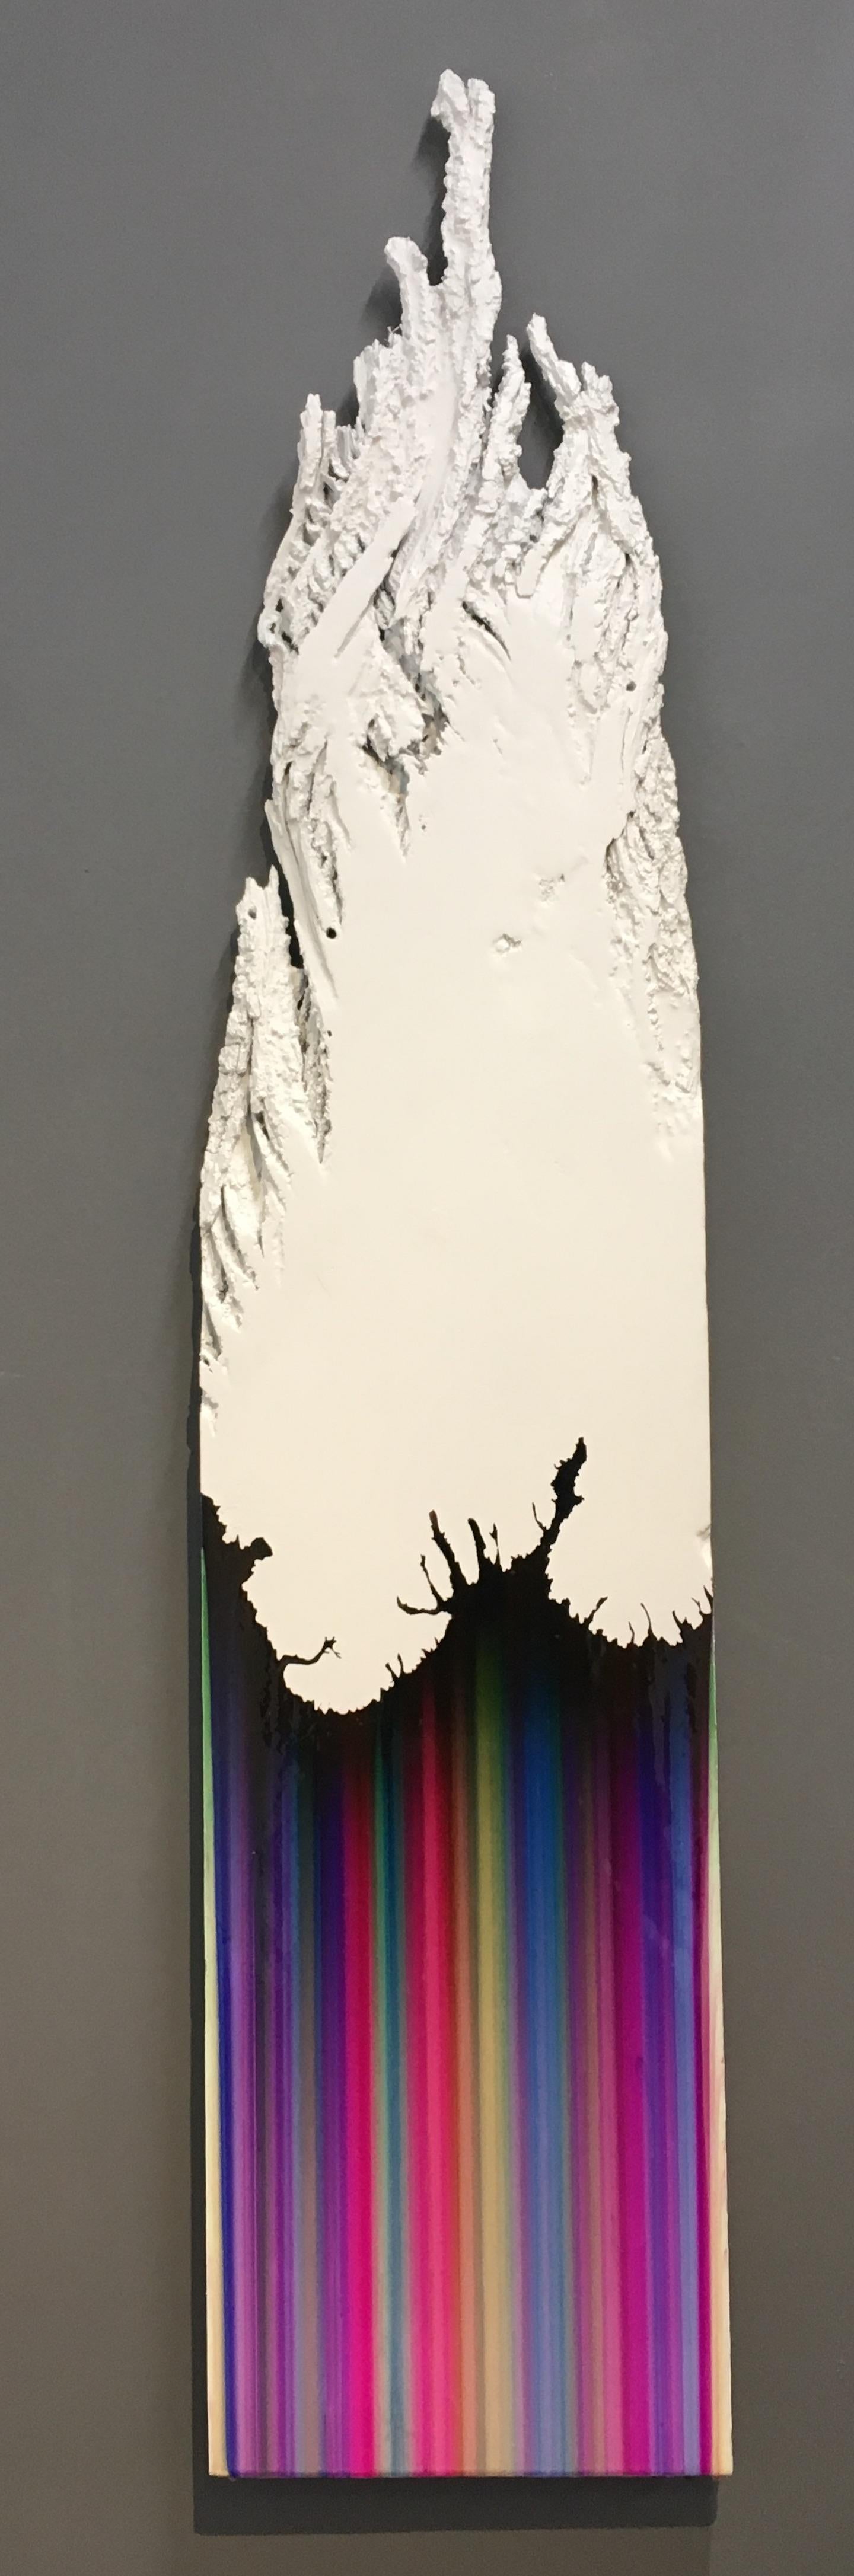 Hickory Two, Vertical Ballpoint and Resin Abstract Painting on White Wood Slice - Mixed Media Art by Shane McAdams